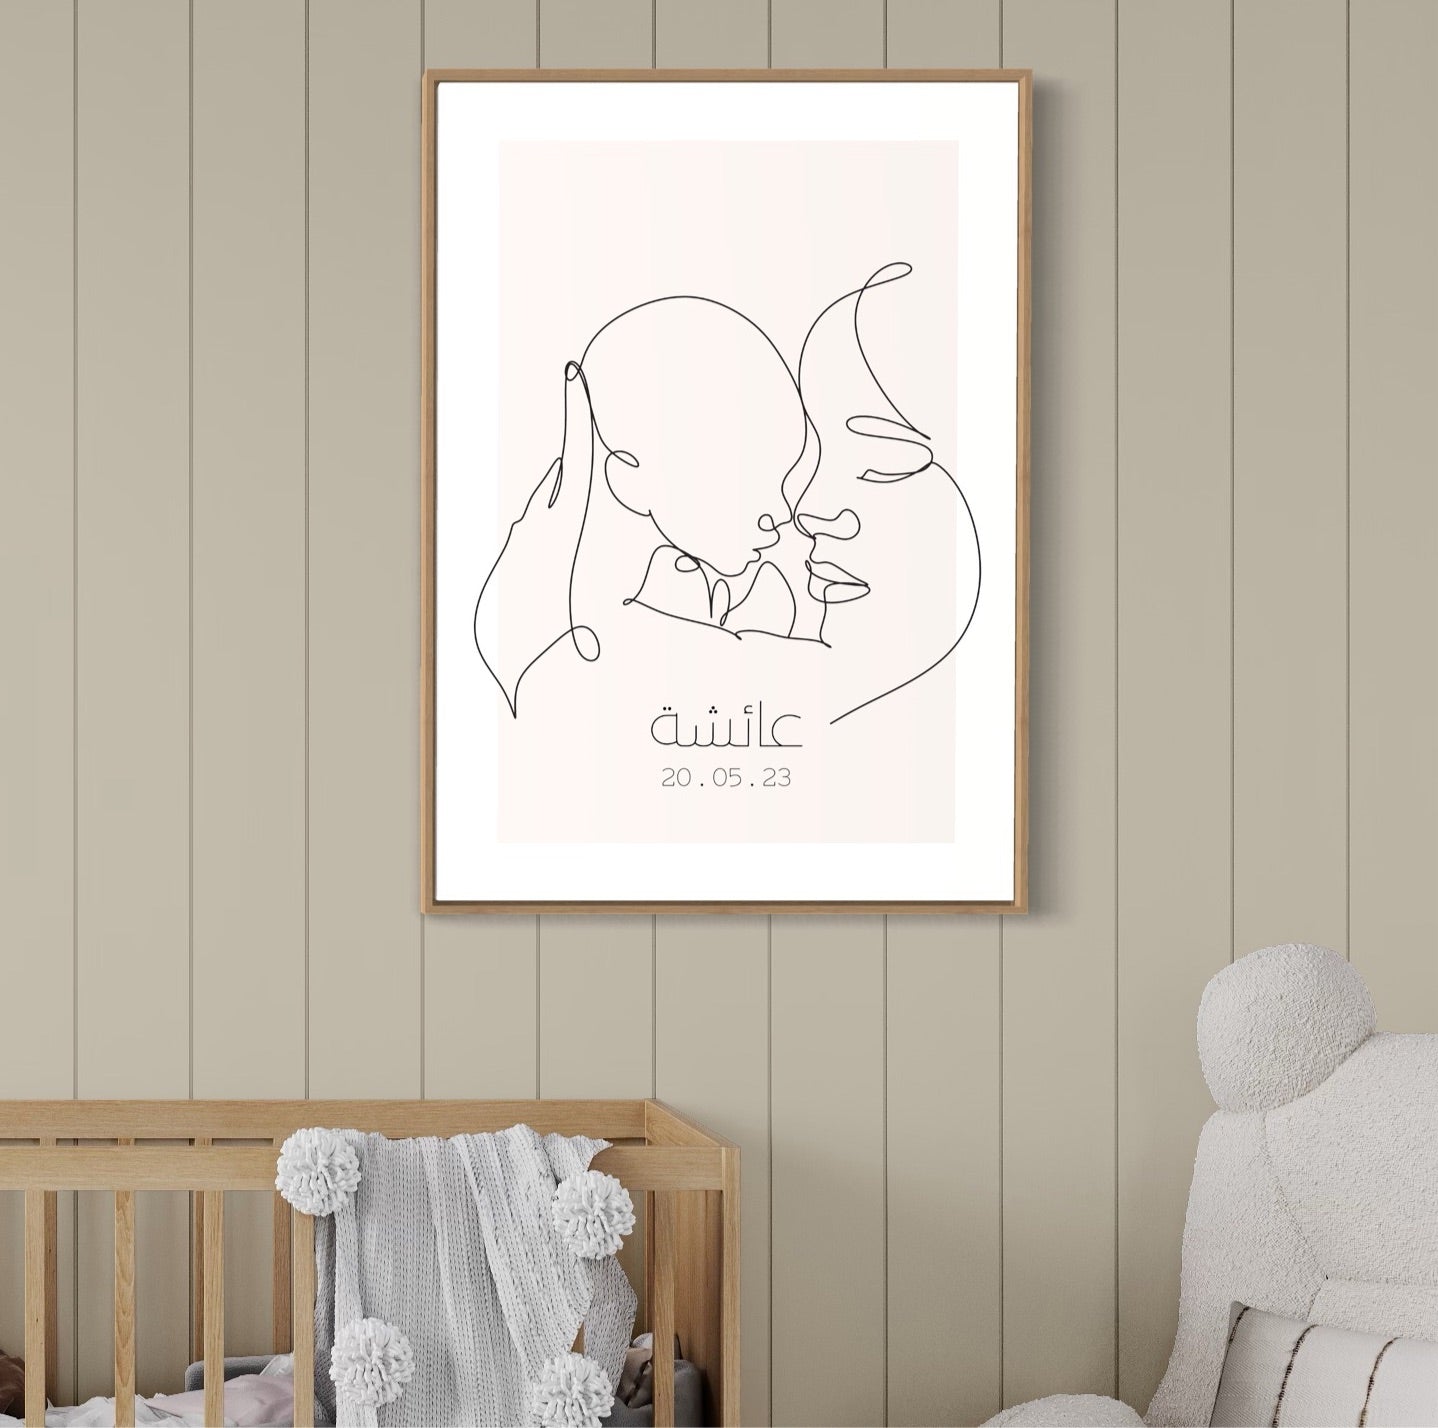 Nose to Nose: Personalized Line Art Print of Mother and Baby - A Timeless Bond